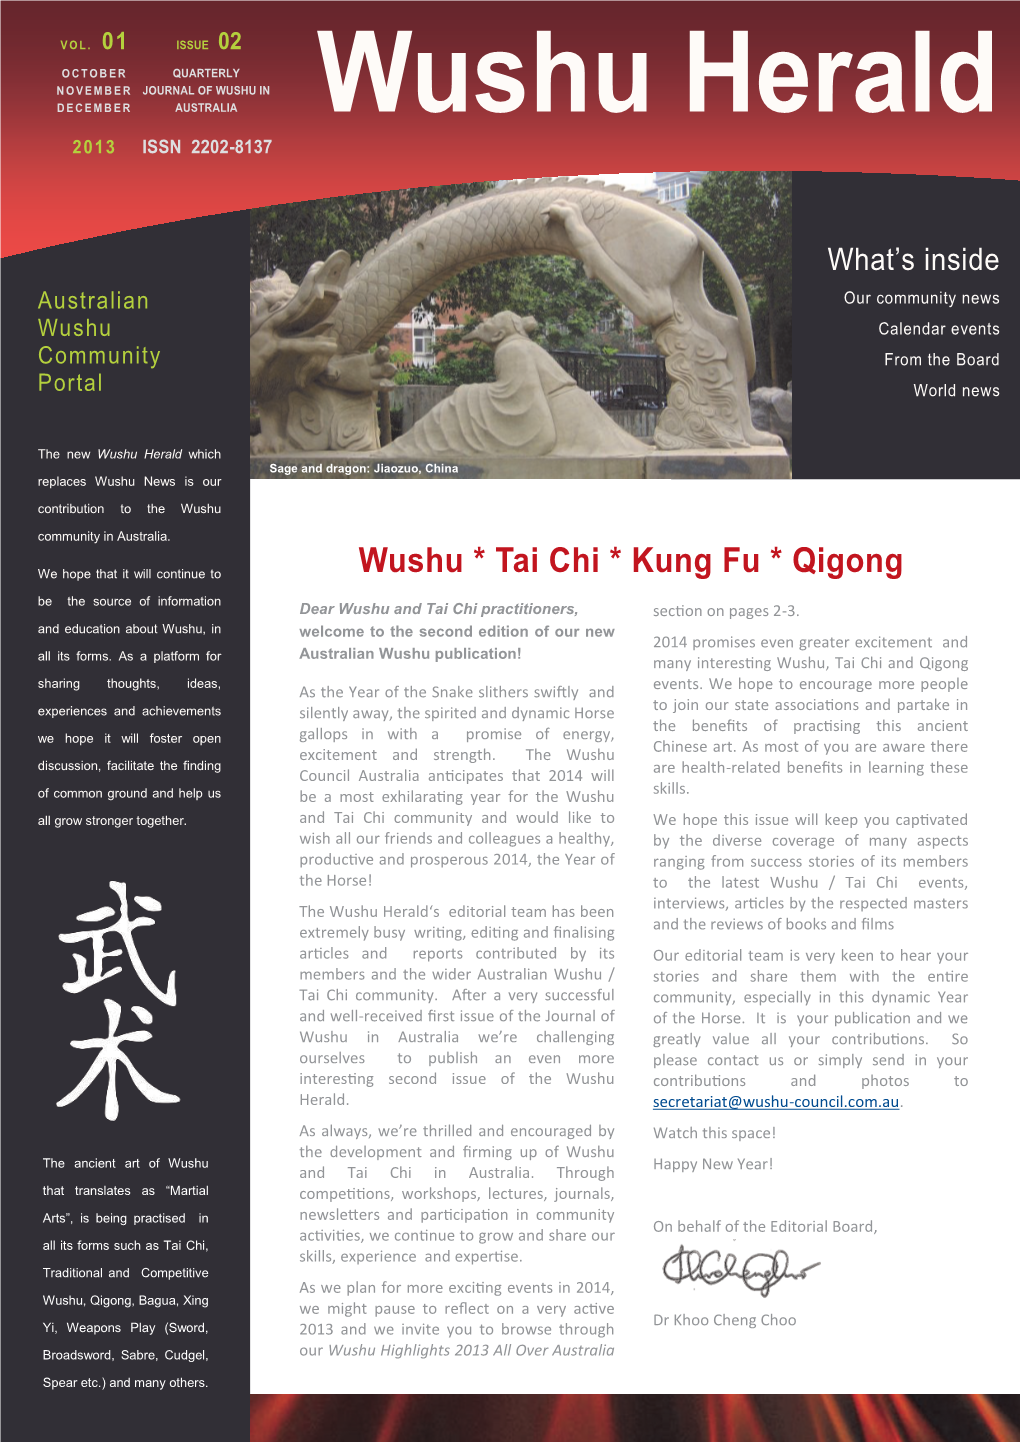 Wushu * Tai Chi * Kung Fu * Qigong Be the Source of Information Dear Wushu and Tai Chi Practitioners, Section on Pages 2-3